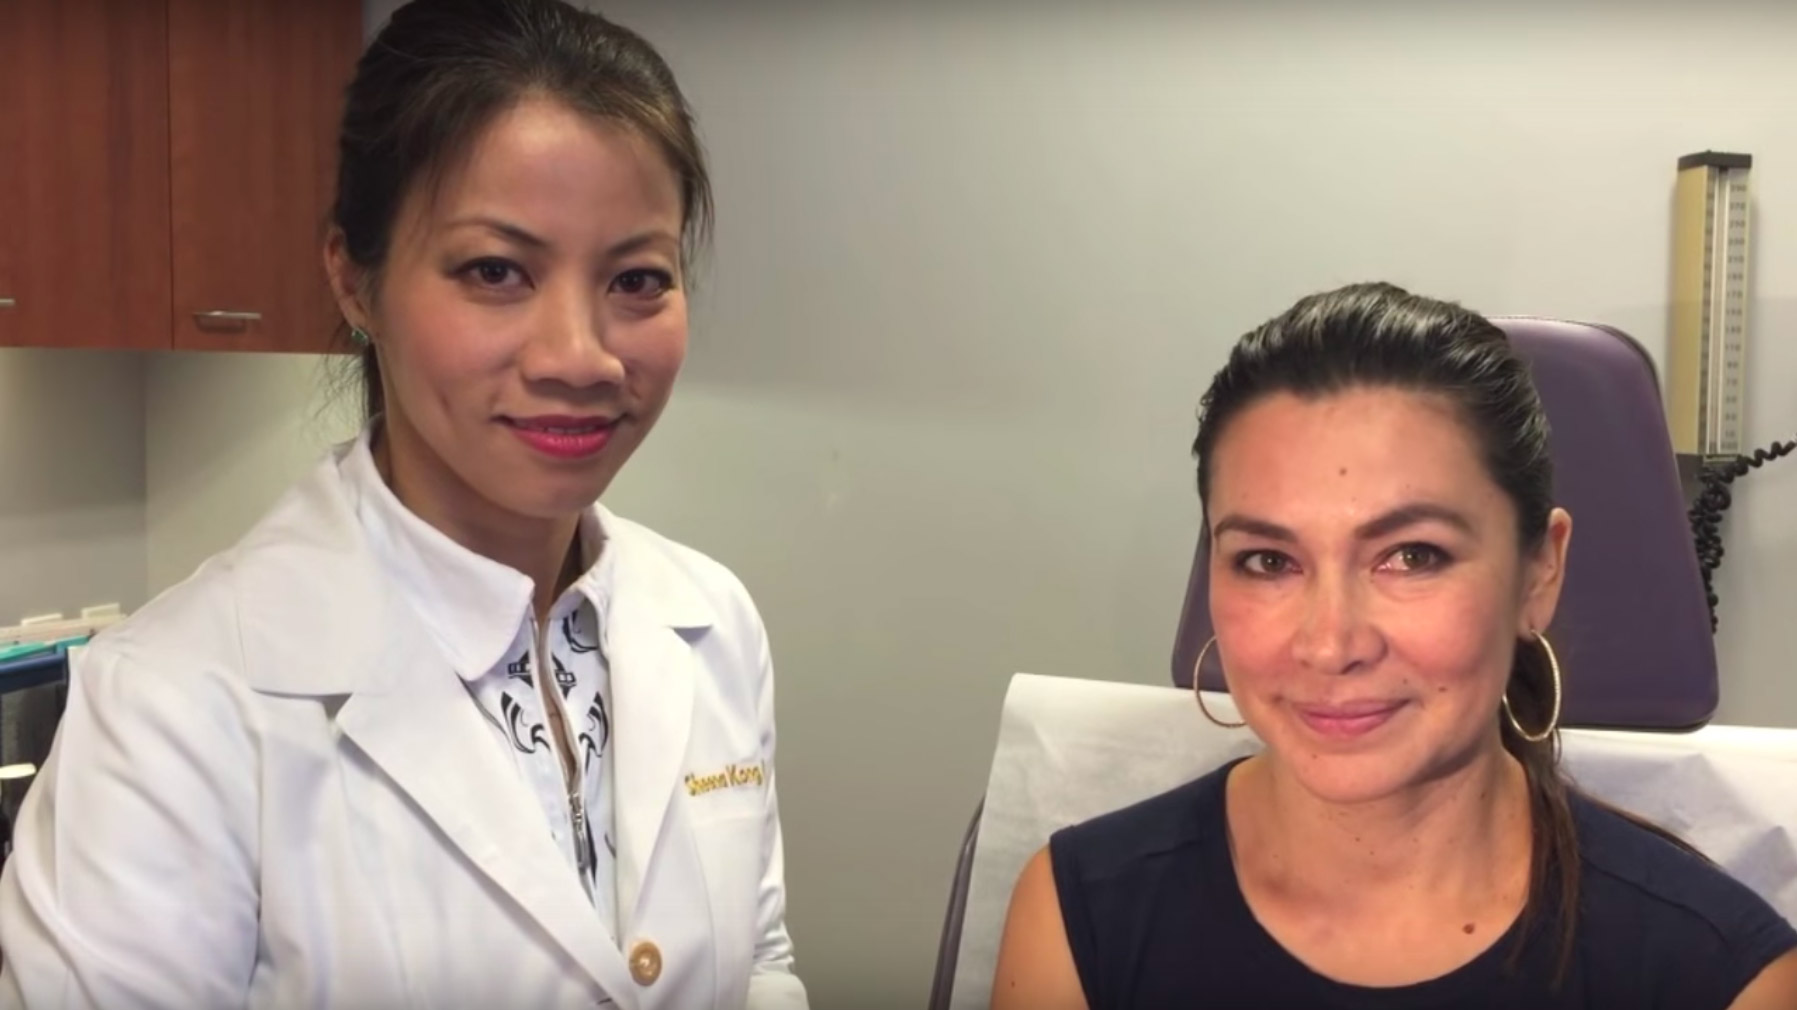 Dr. Sheena kong with patient while talking about voluma in video